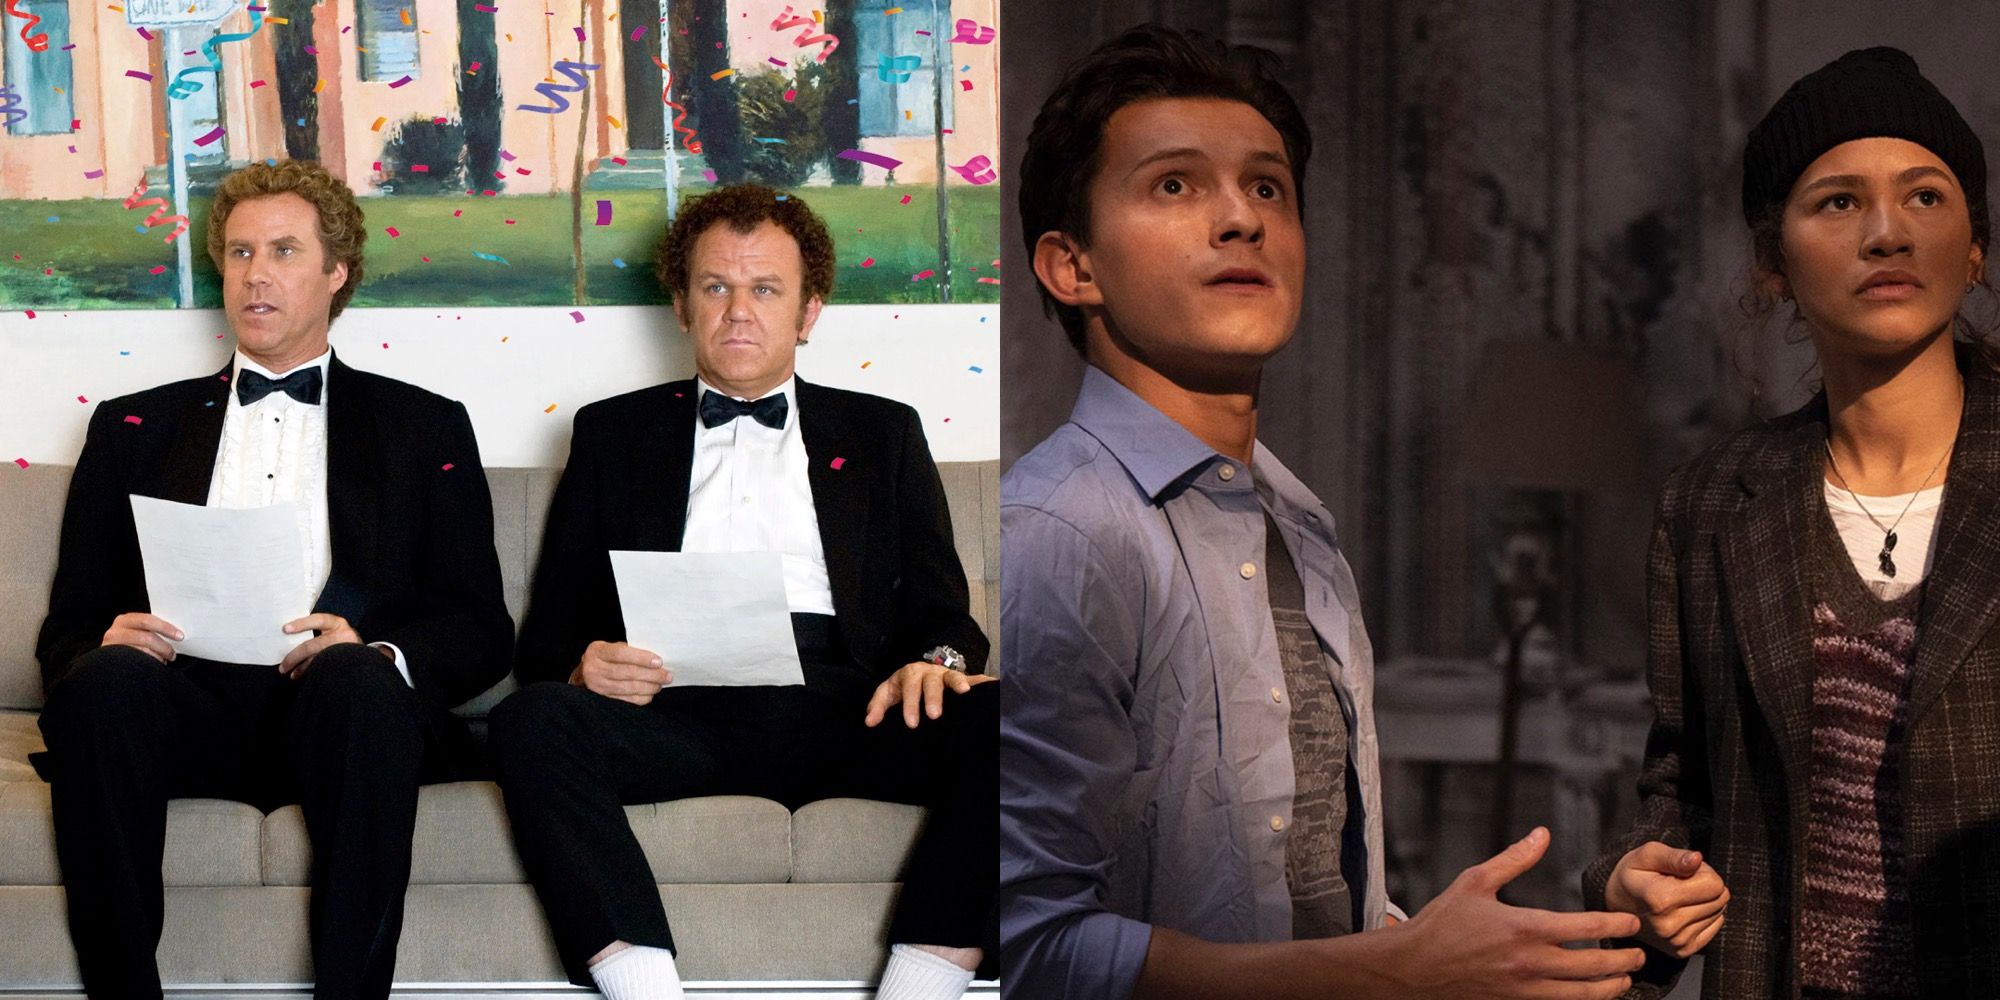 Split Promo Images Of The Step Brothers And Spider-Man No Way Home